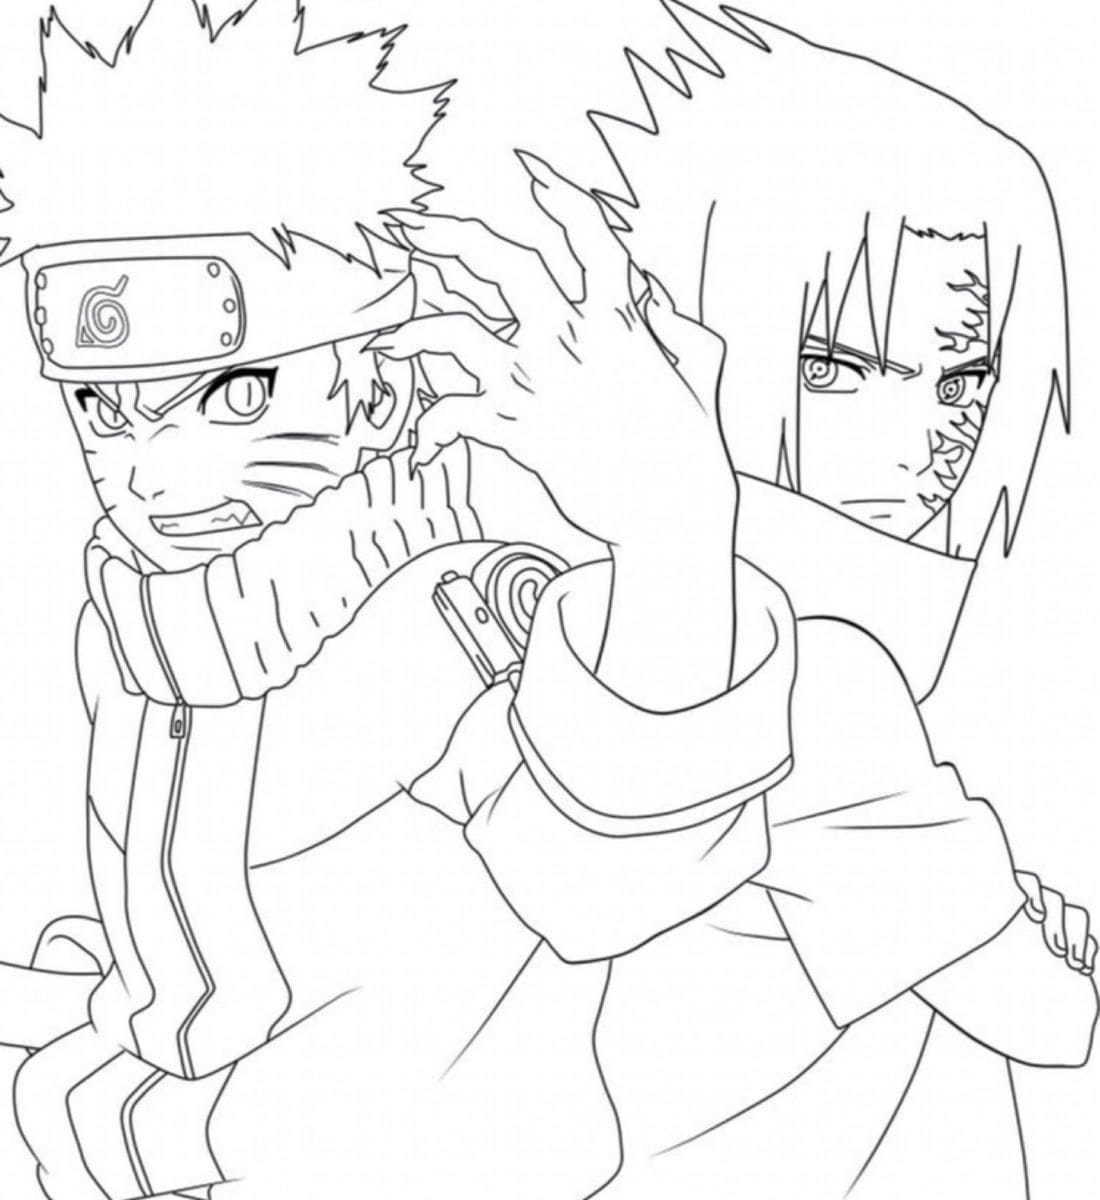 Sasuke Coloring Pages - Free Printable Coloring Pages pour Coloriage Sharingan